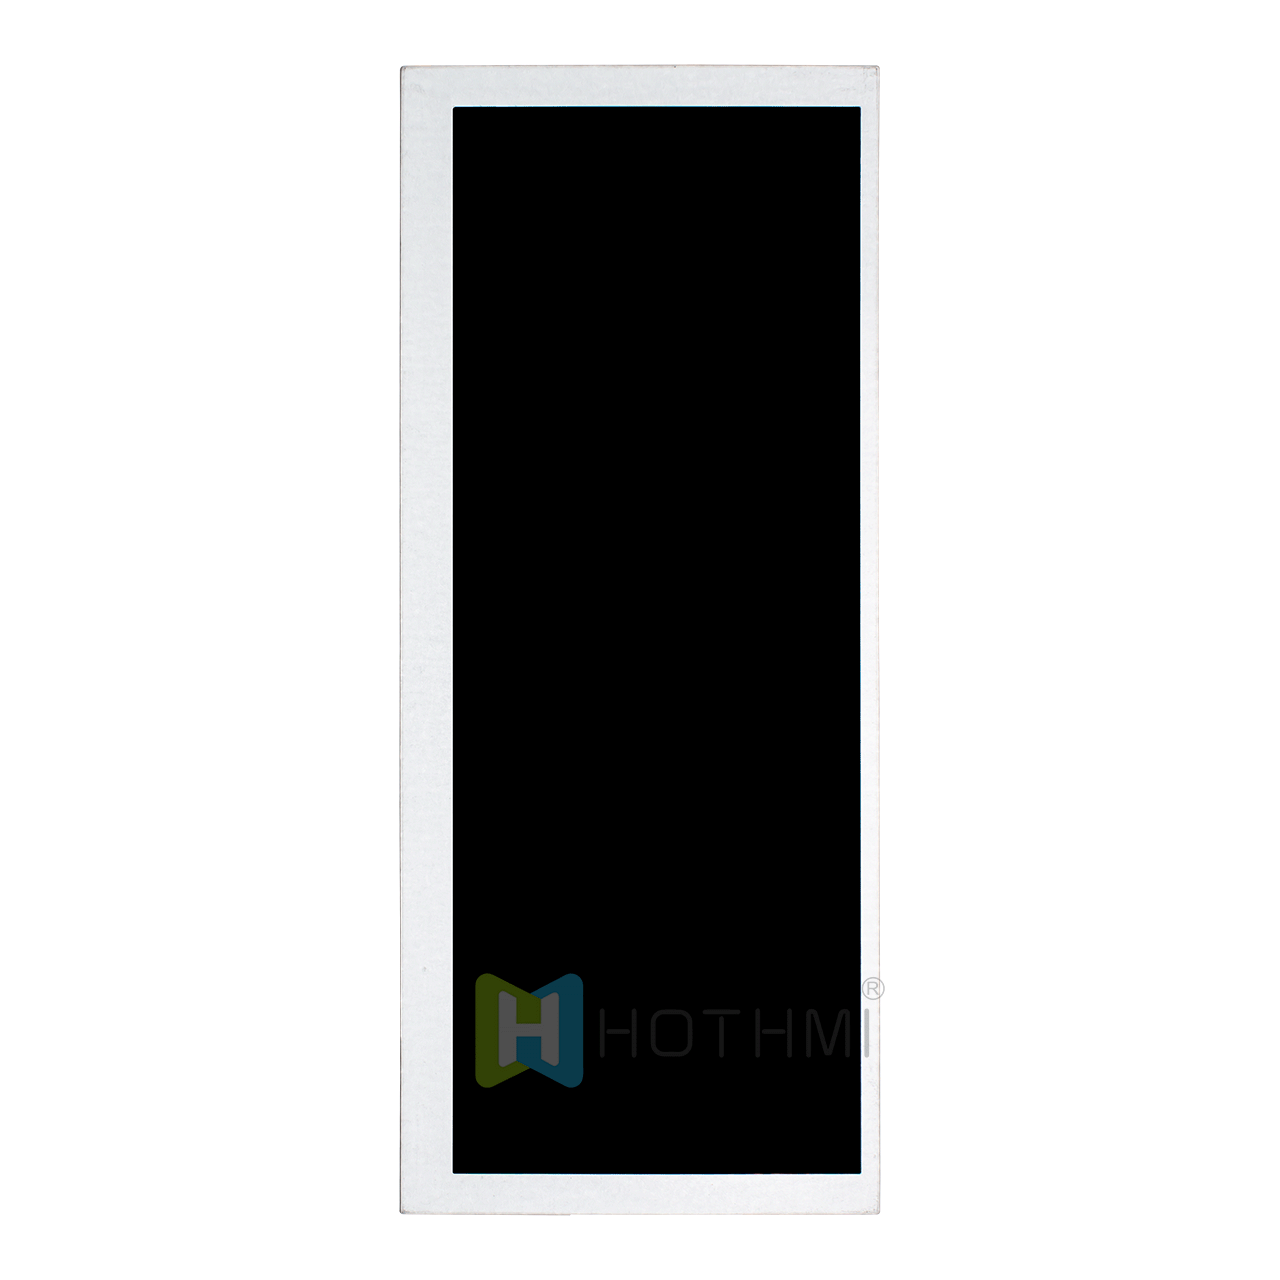 10.3-inch TFT LCD IPS LCD display MIPI interface/1440x540 dot matrix color screen module NV3051F/optional touch screen